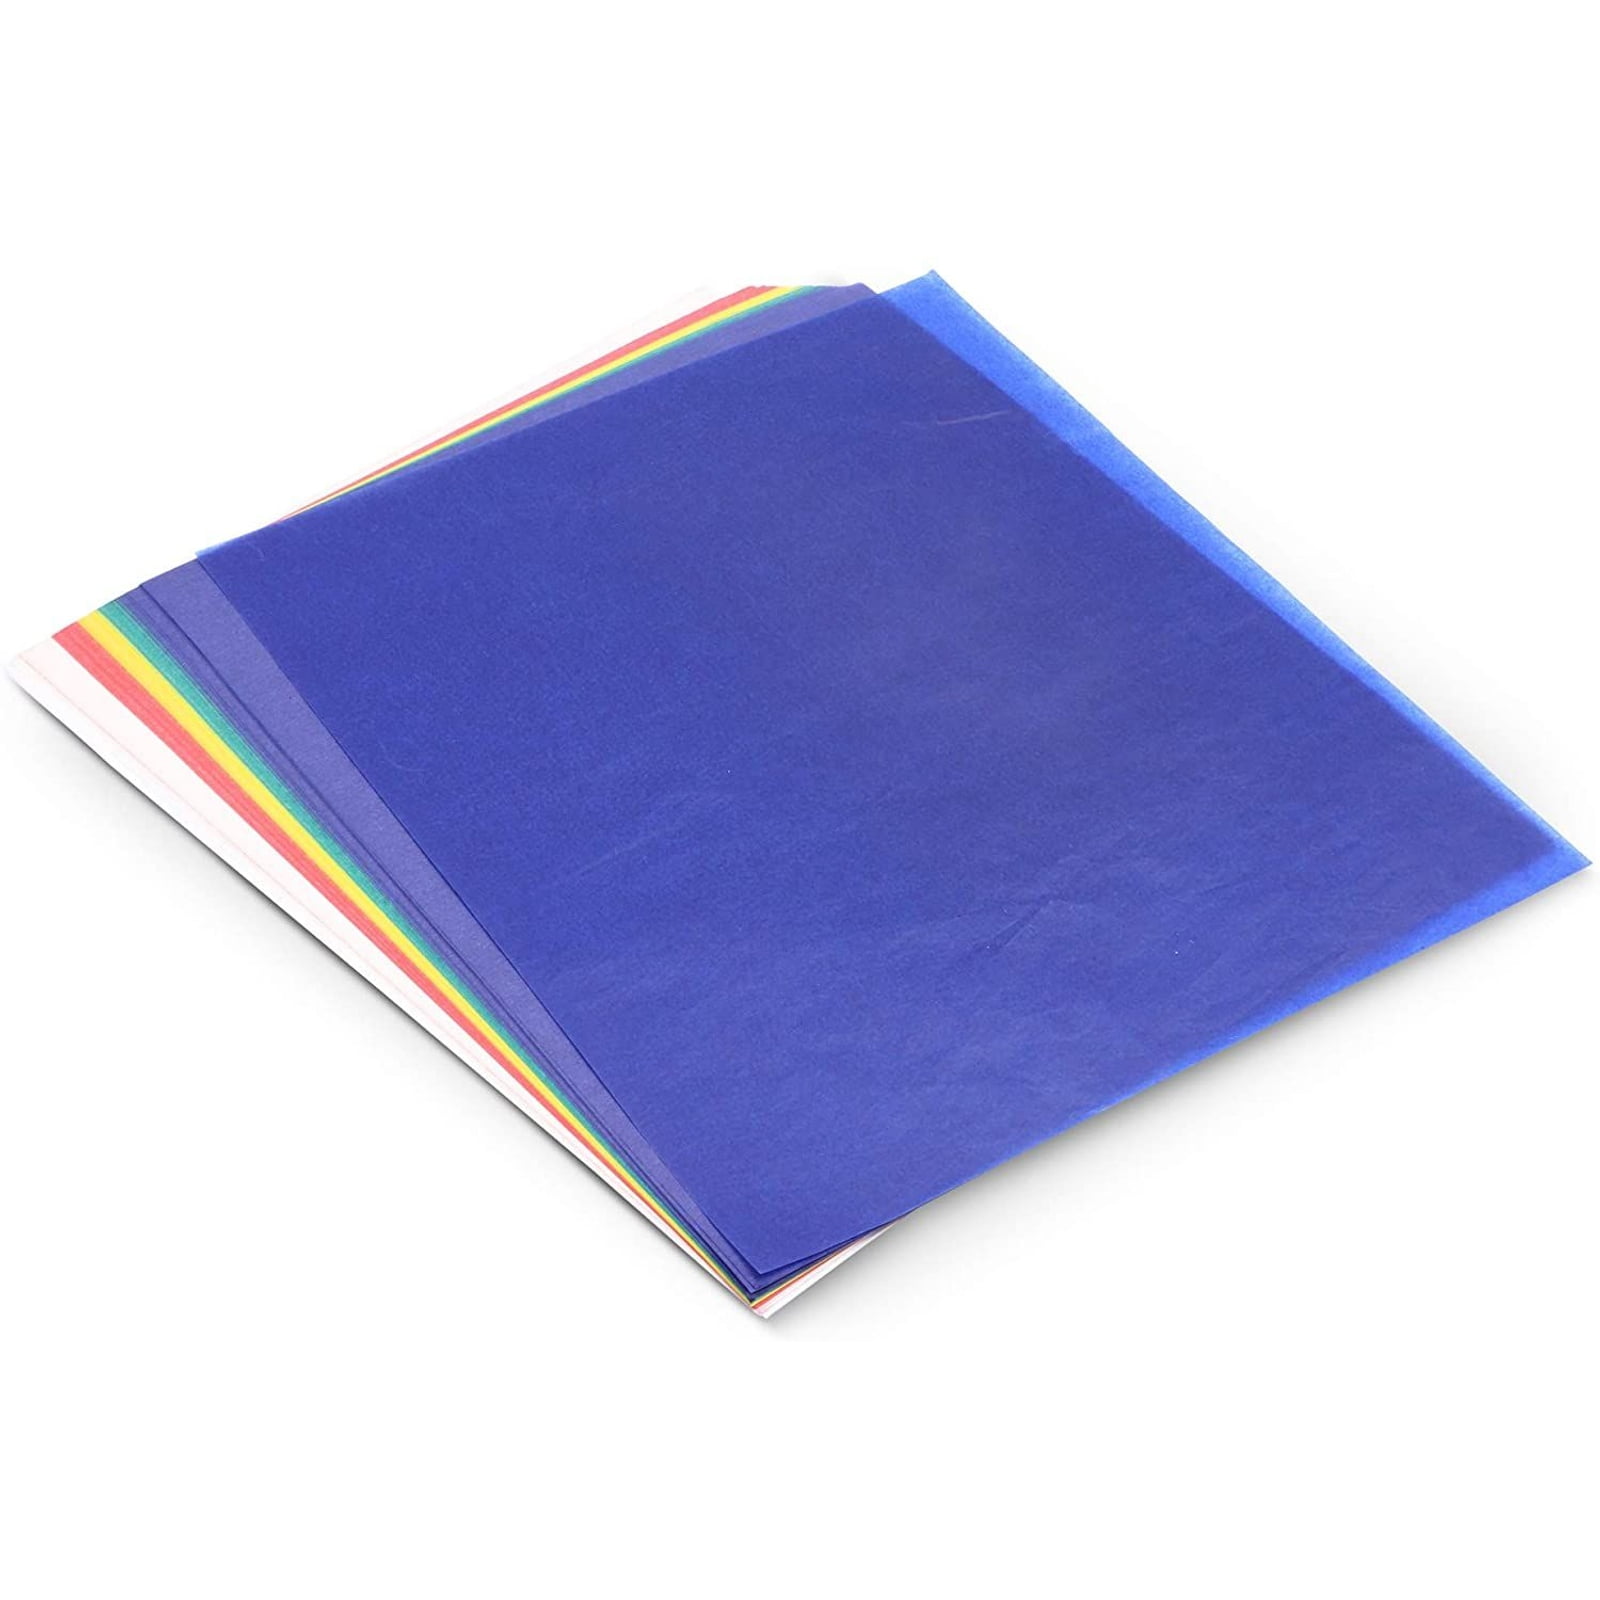 Carbon Paper for Tracing on Fabric, Wood, and Canvas (5 Colors, 9 x 11 in,  50 Sheets) 